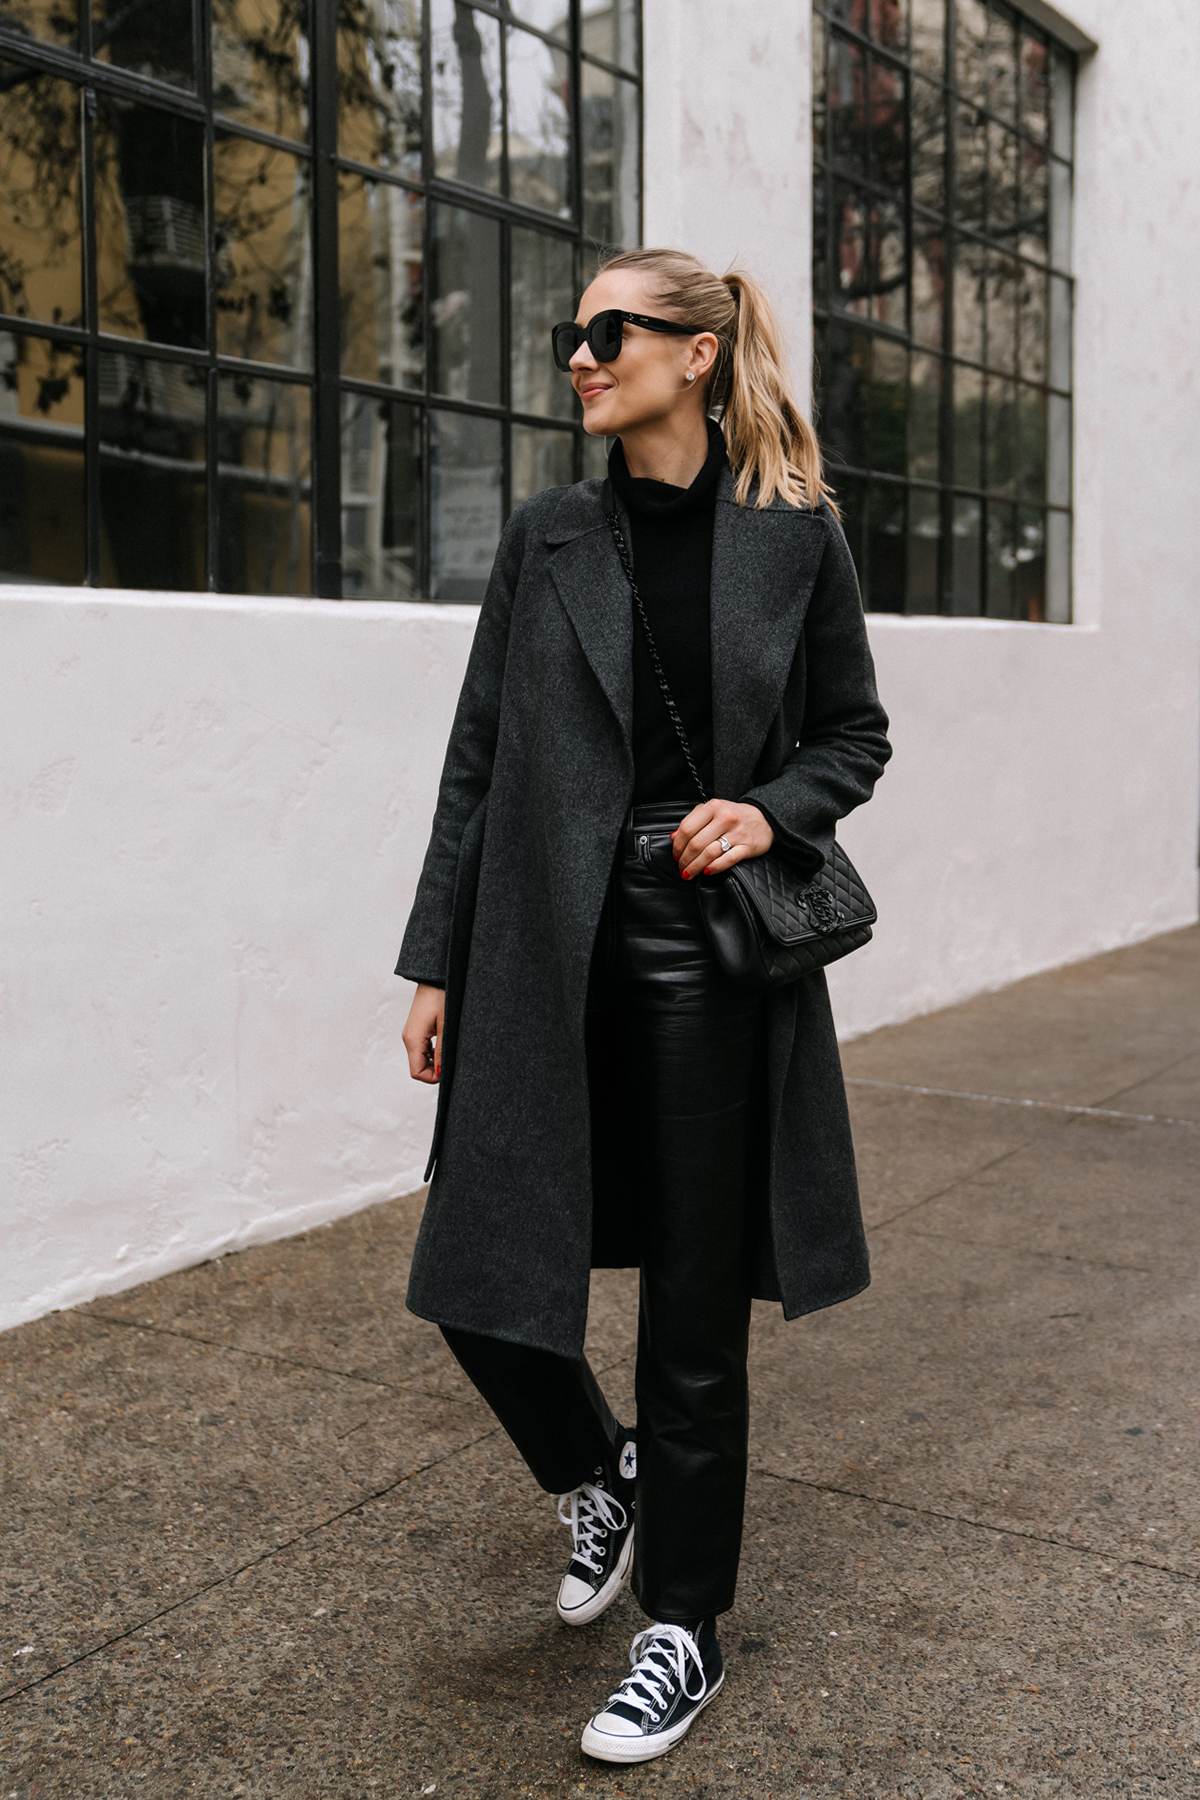 Fashion Jackson Wearing Max Mara Grey Wrap Coat Black Turtleneck Sweater AGOLDE Black Recycled Leather Pants Converse Black High Top Sneakers Street Style womens converse outfits